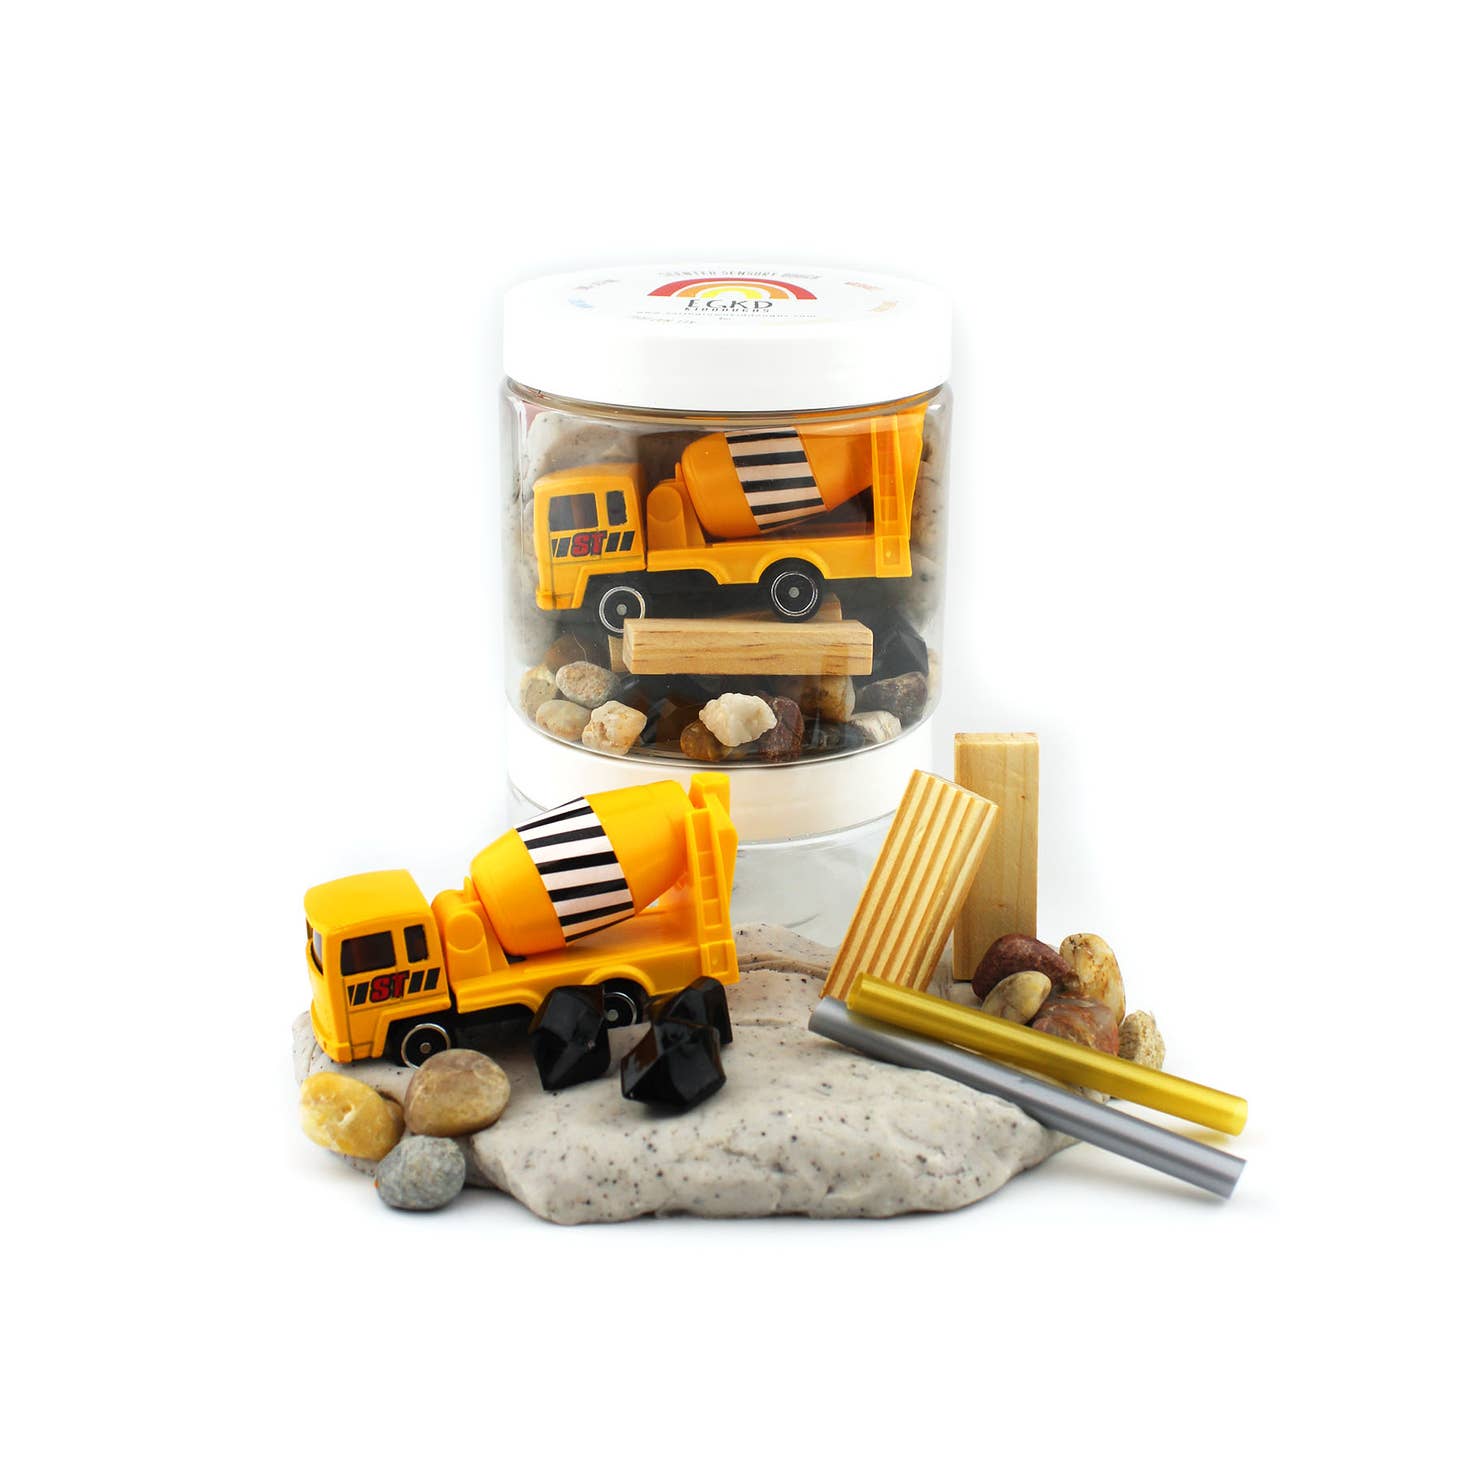 Construction Play Dough-To-Go Kit - Twinkle Twinkle Little One